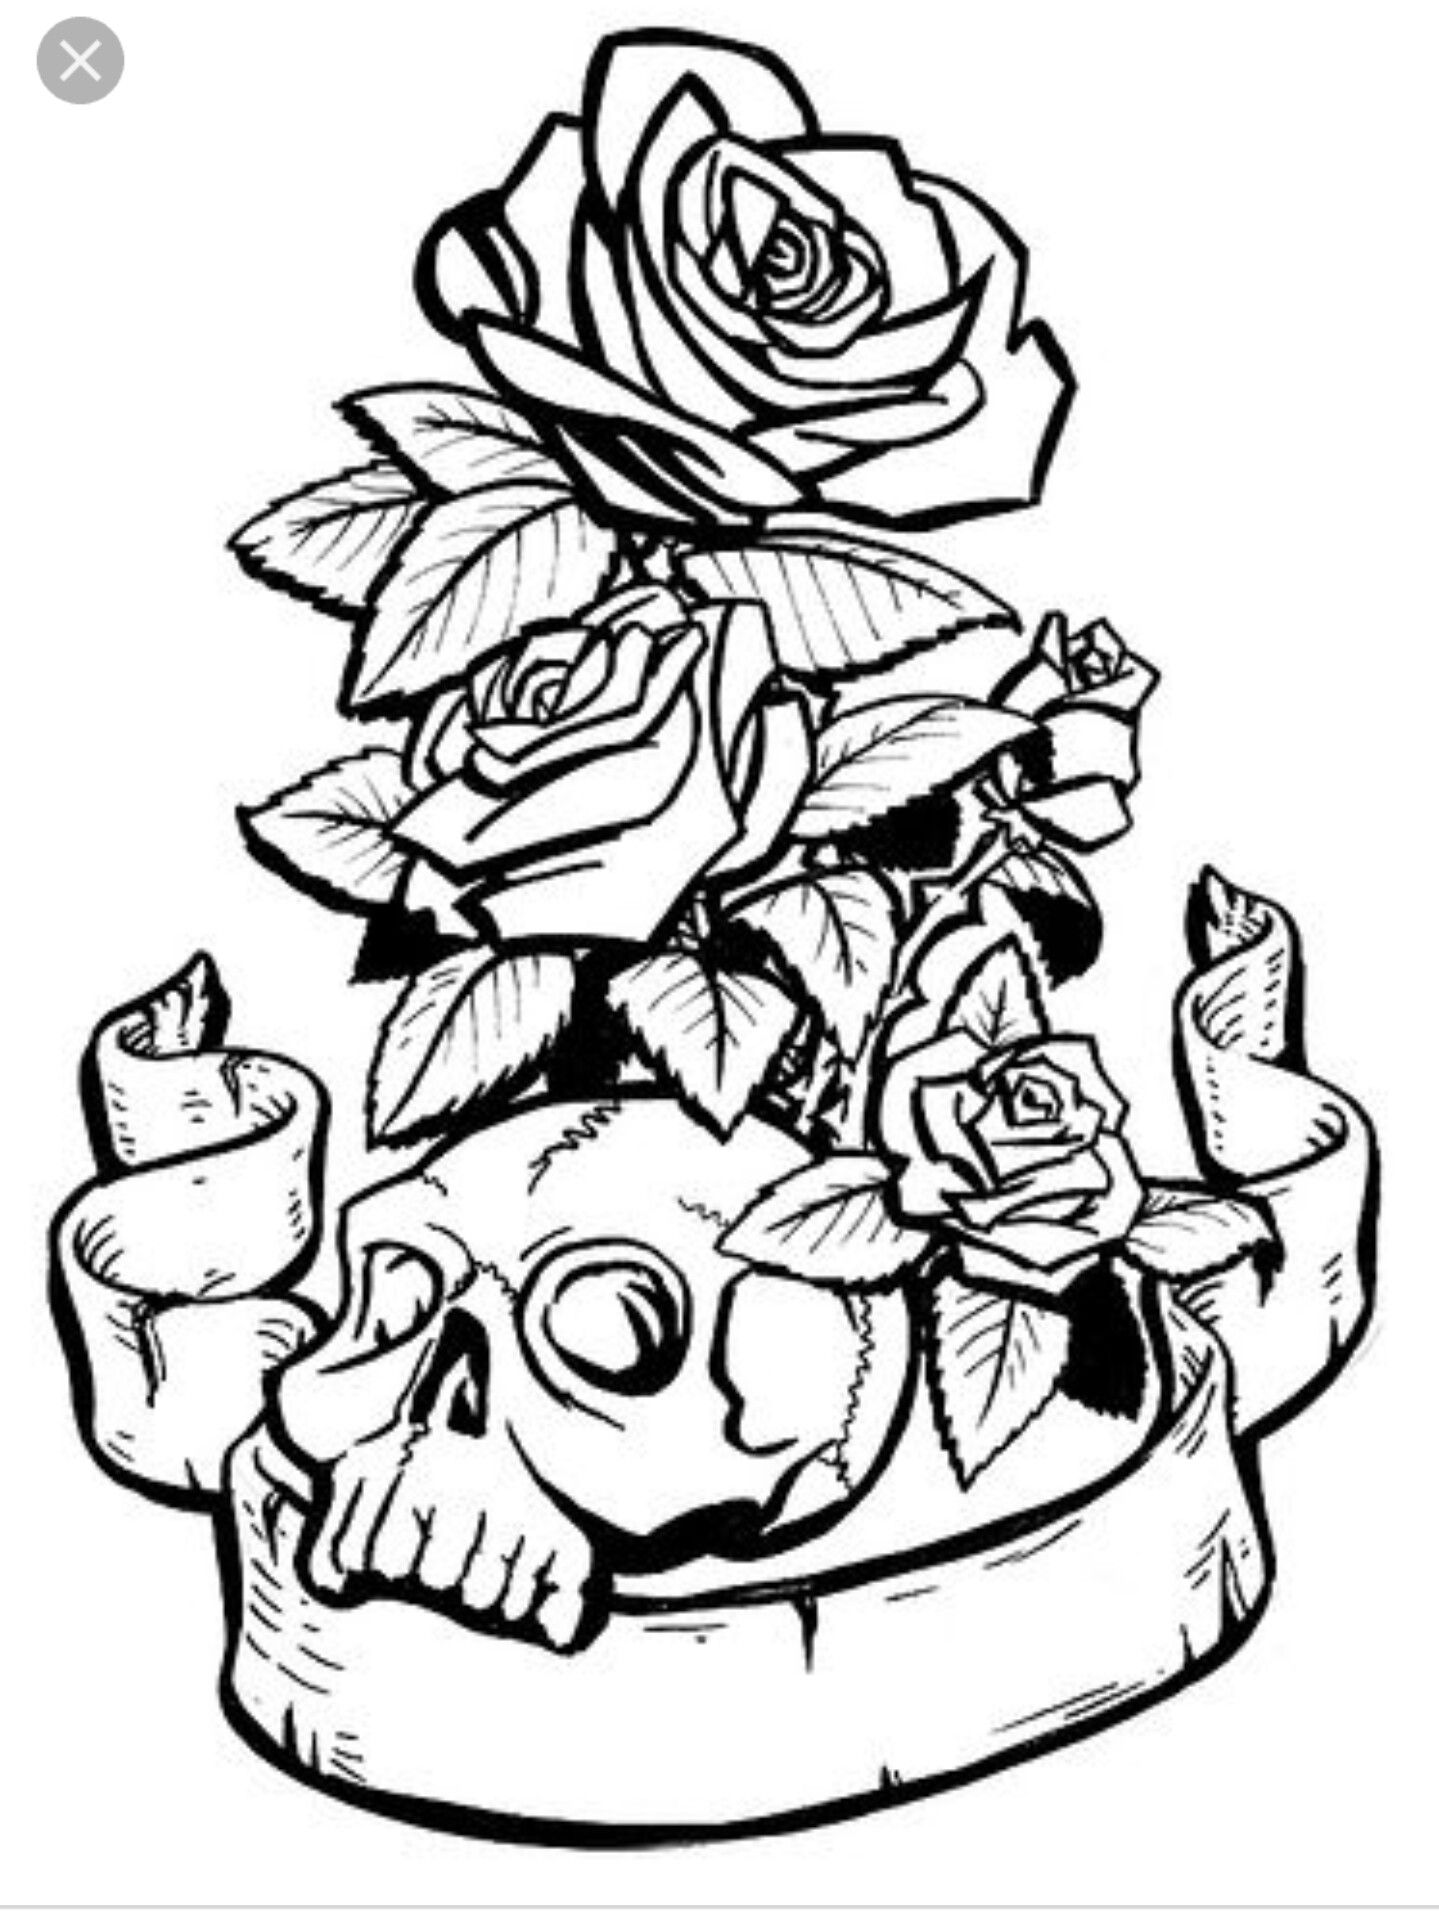 Pin by Amanda Witt on skull coloring pages | Skull coloring pages, Coloring  pages, Free coloring pages